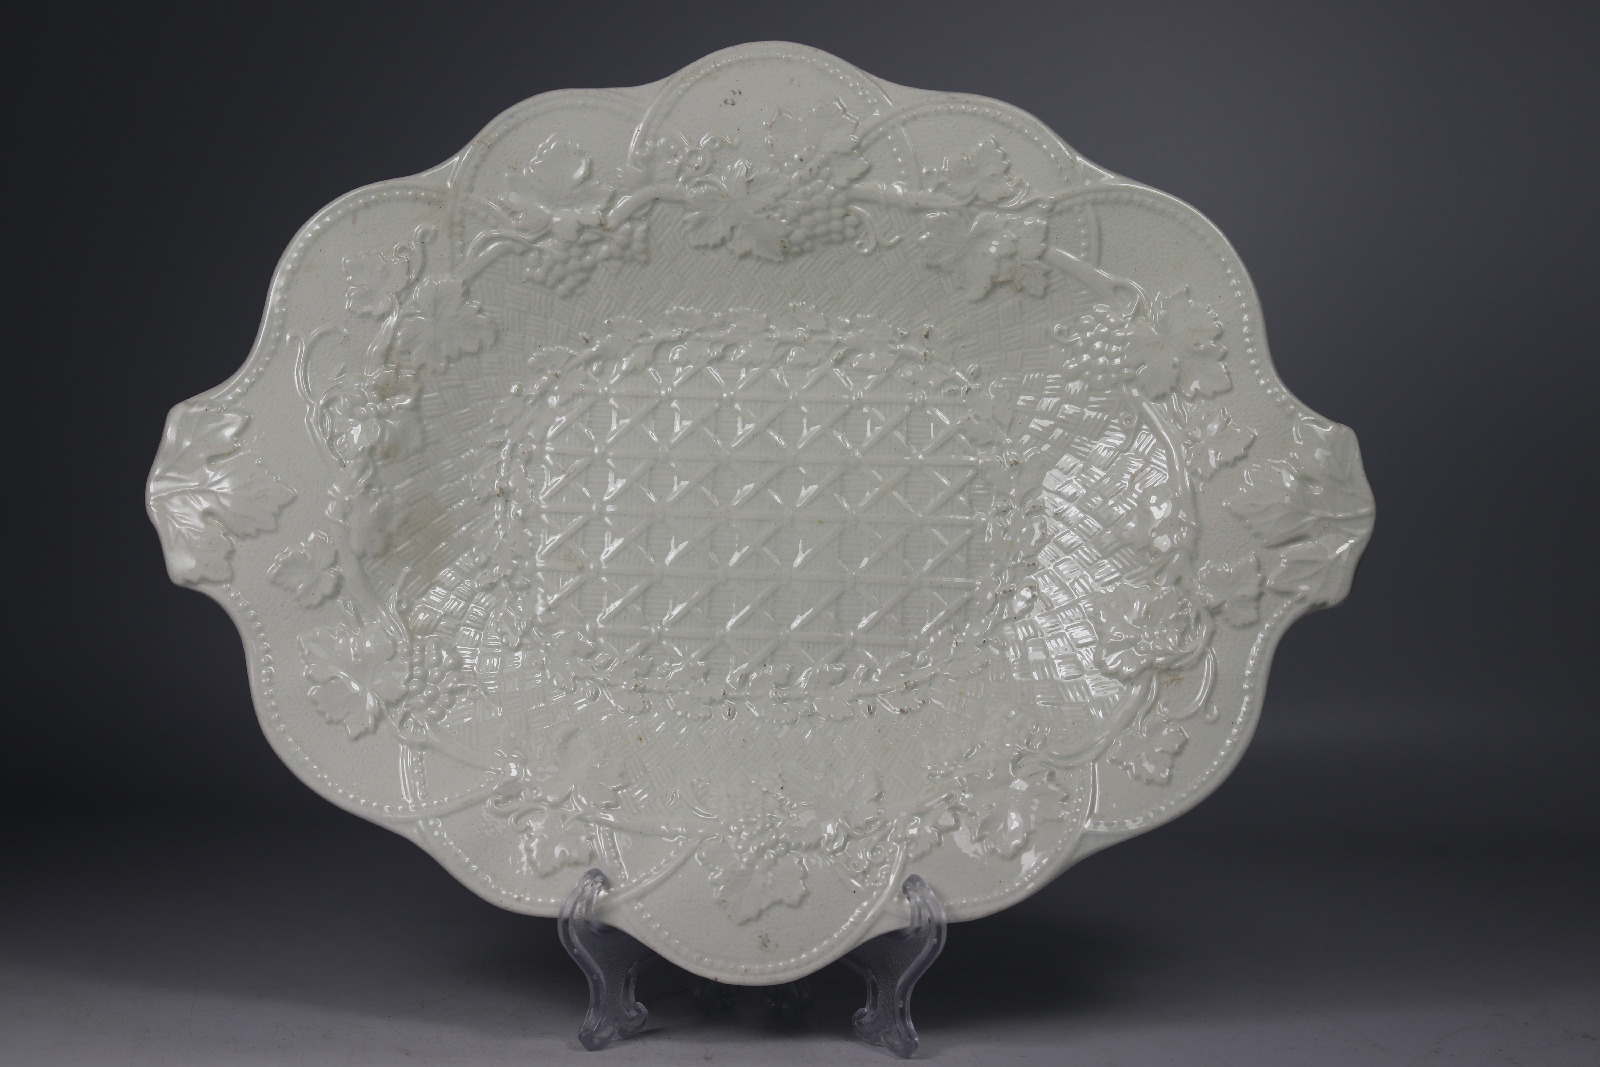 Antique 19th Century Wedgwood Embossed Creamware Plate Dish with Grapes